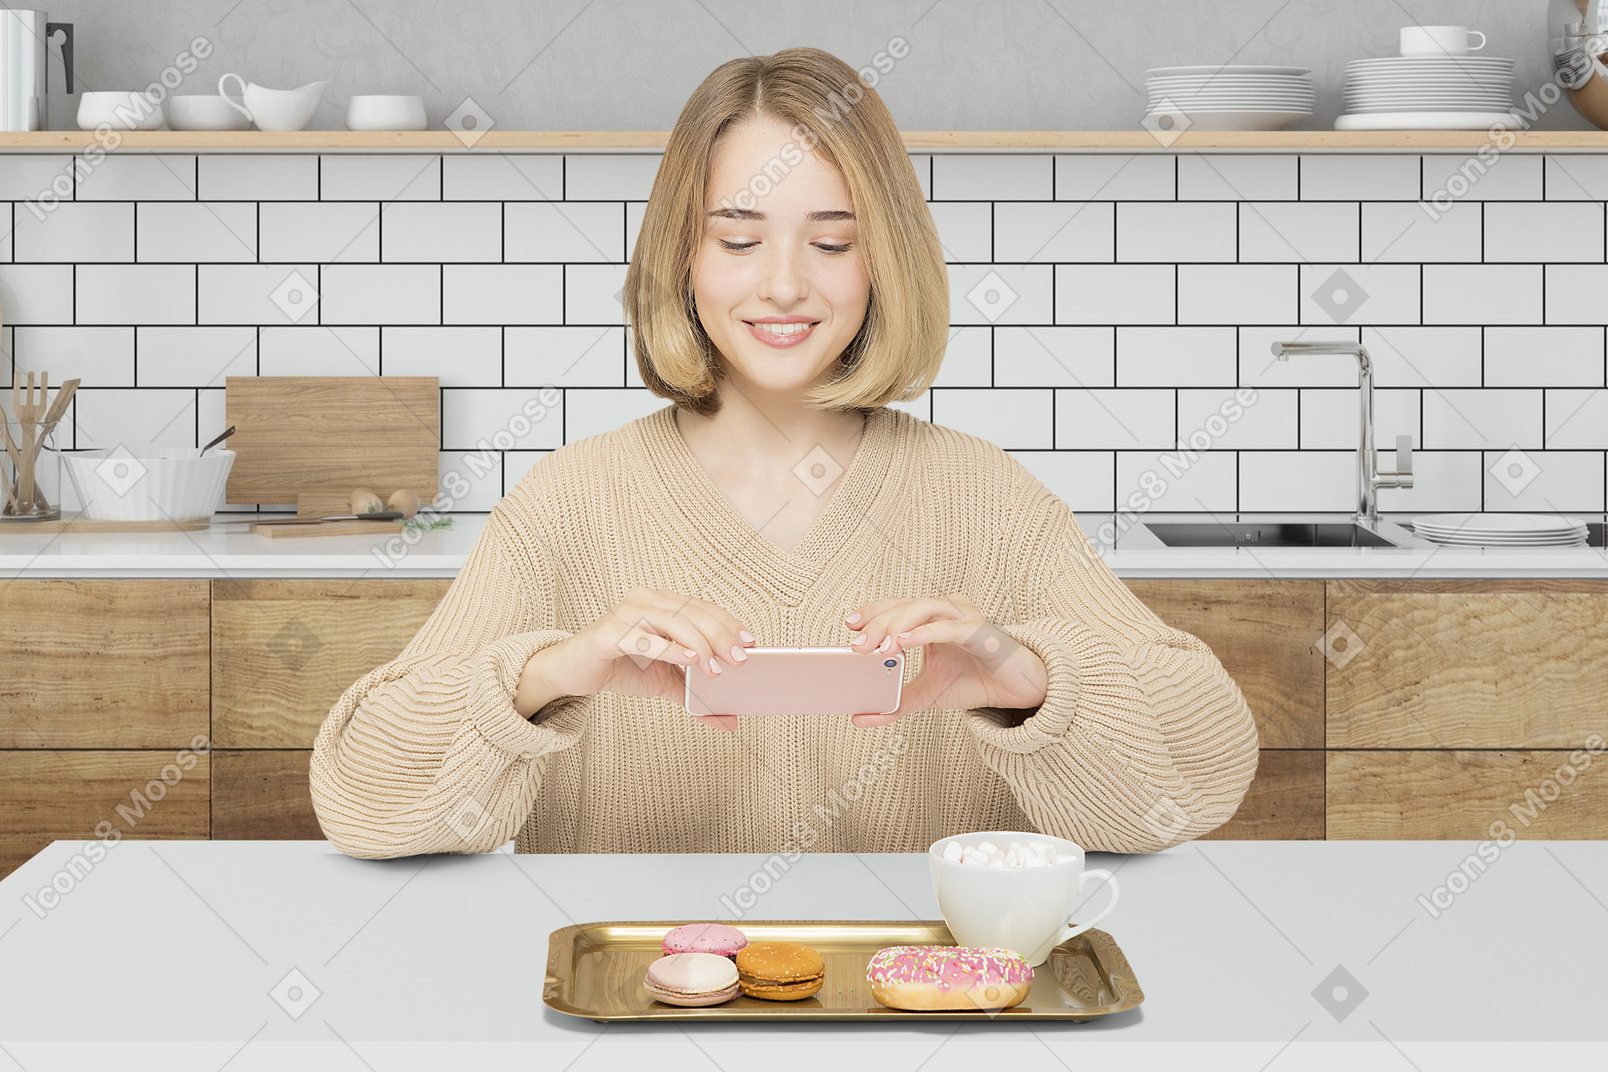 Woman taking picture of her meal in the kitchen